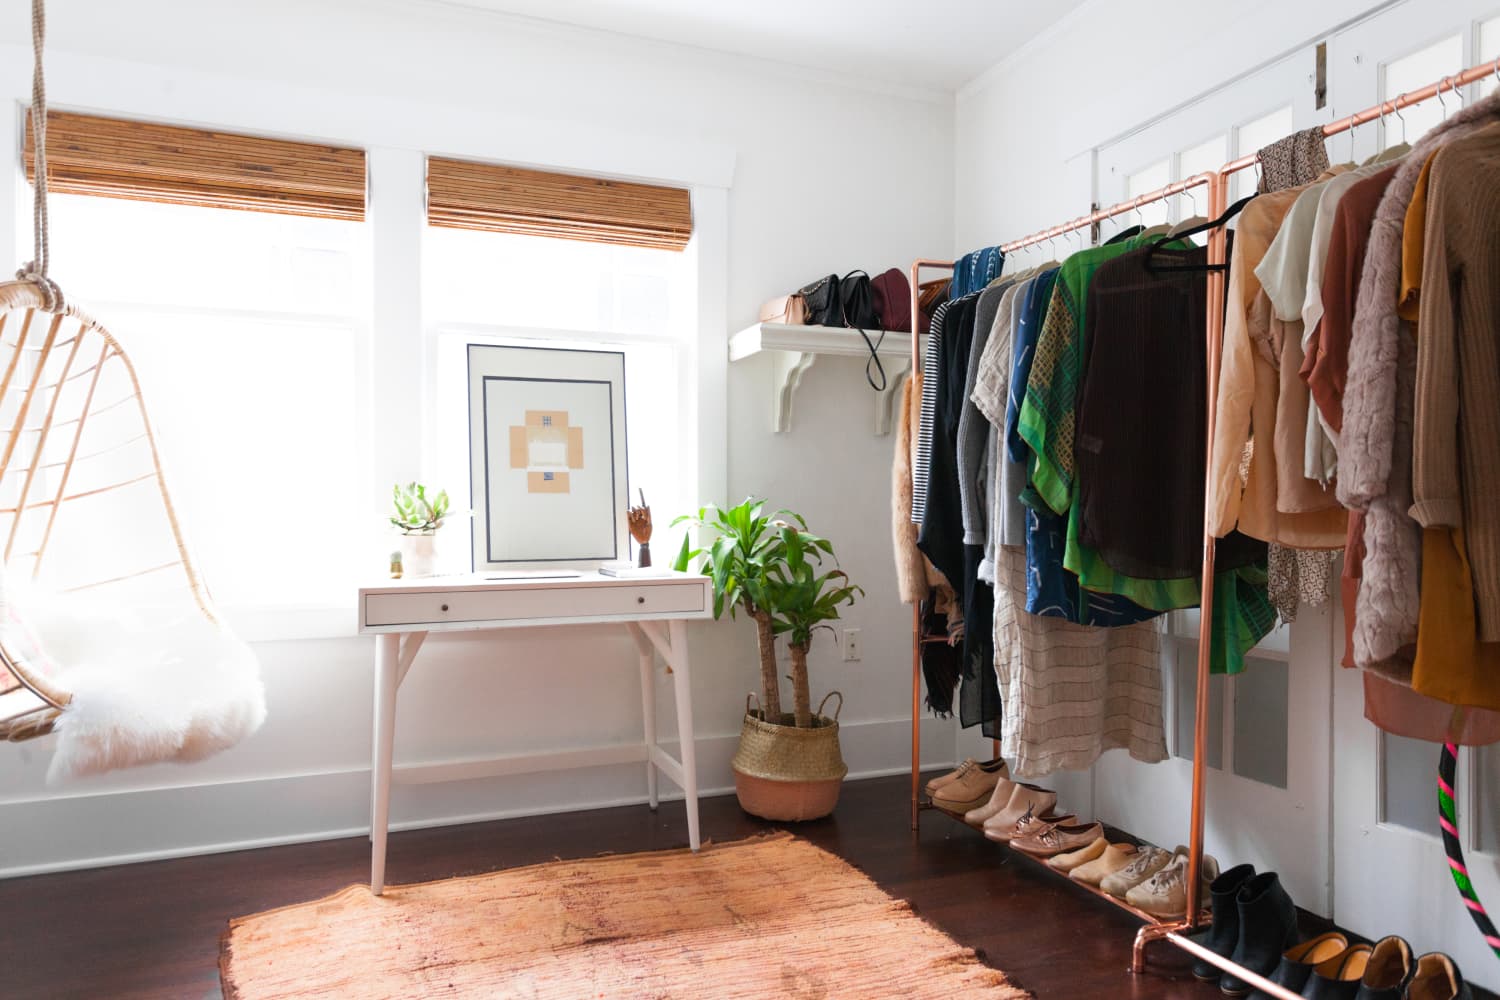 18 Open Closet Ideas To Make Getting Dressed a Cinch